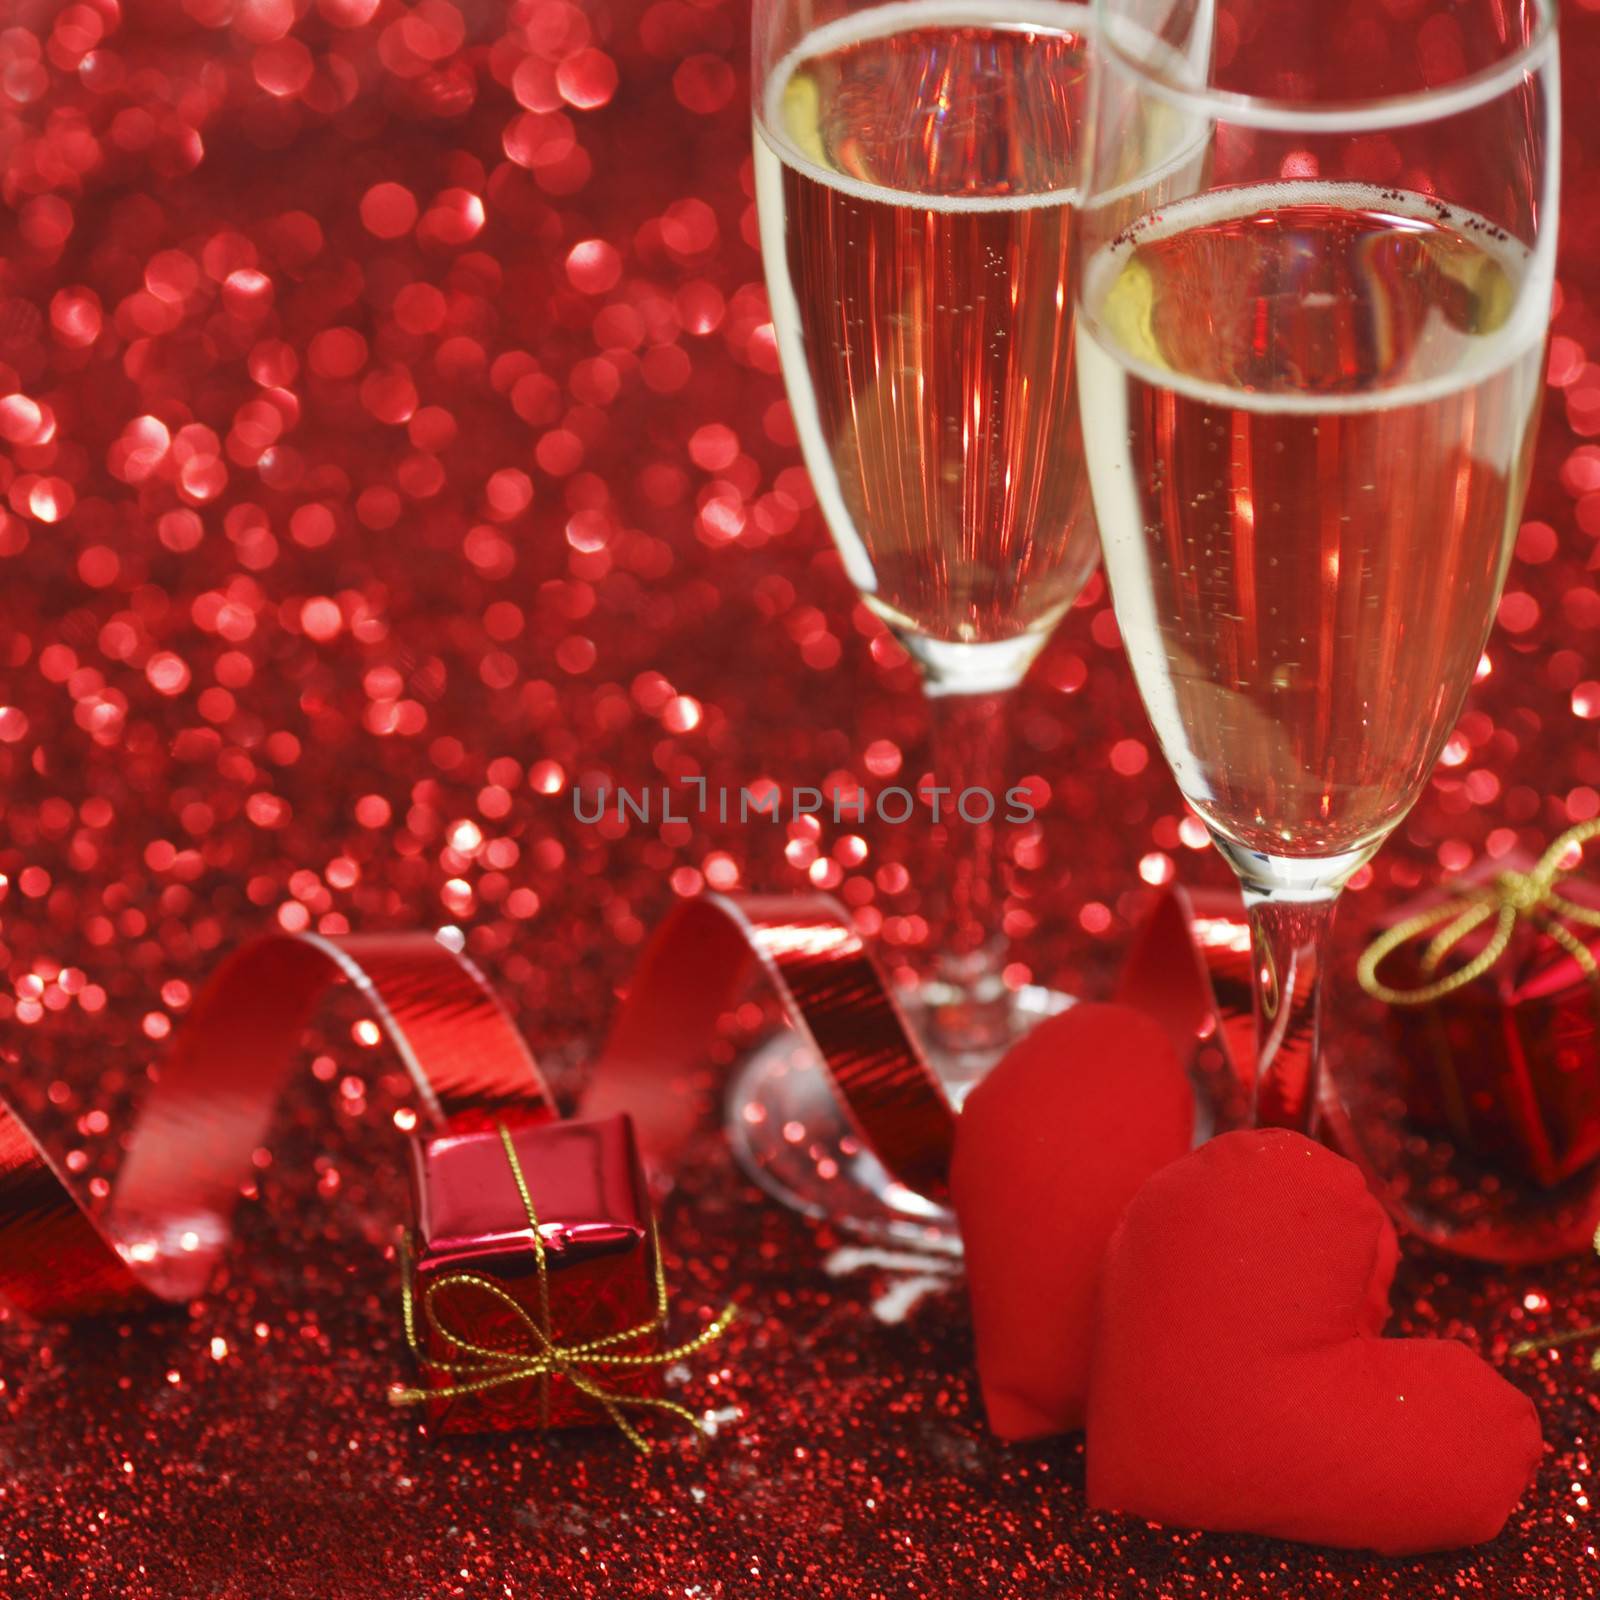 Champagne and valentines day gifts on red glitter background